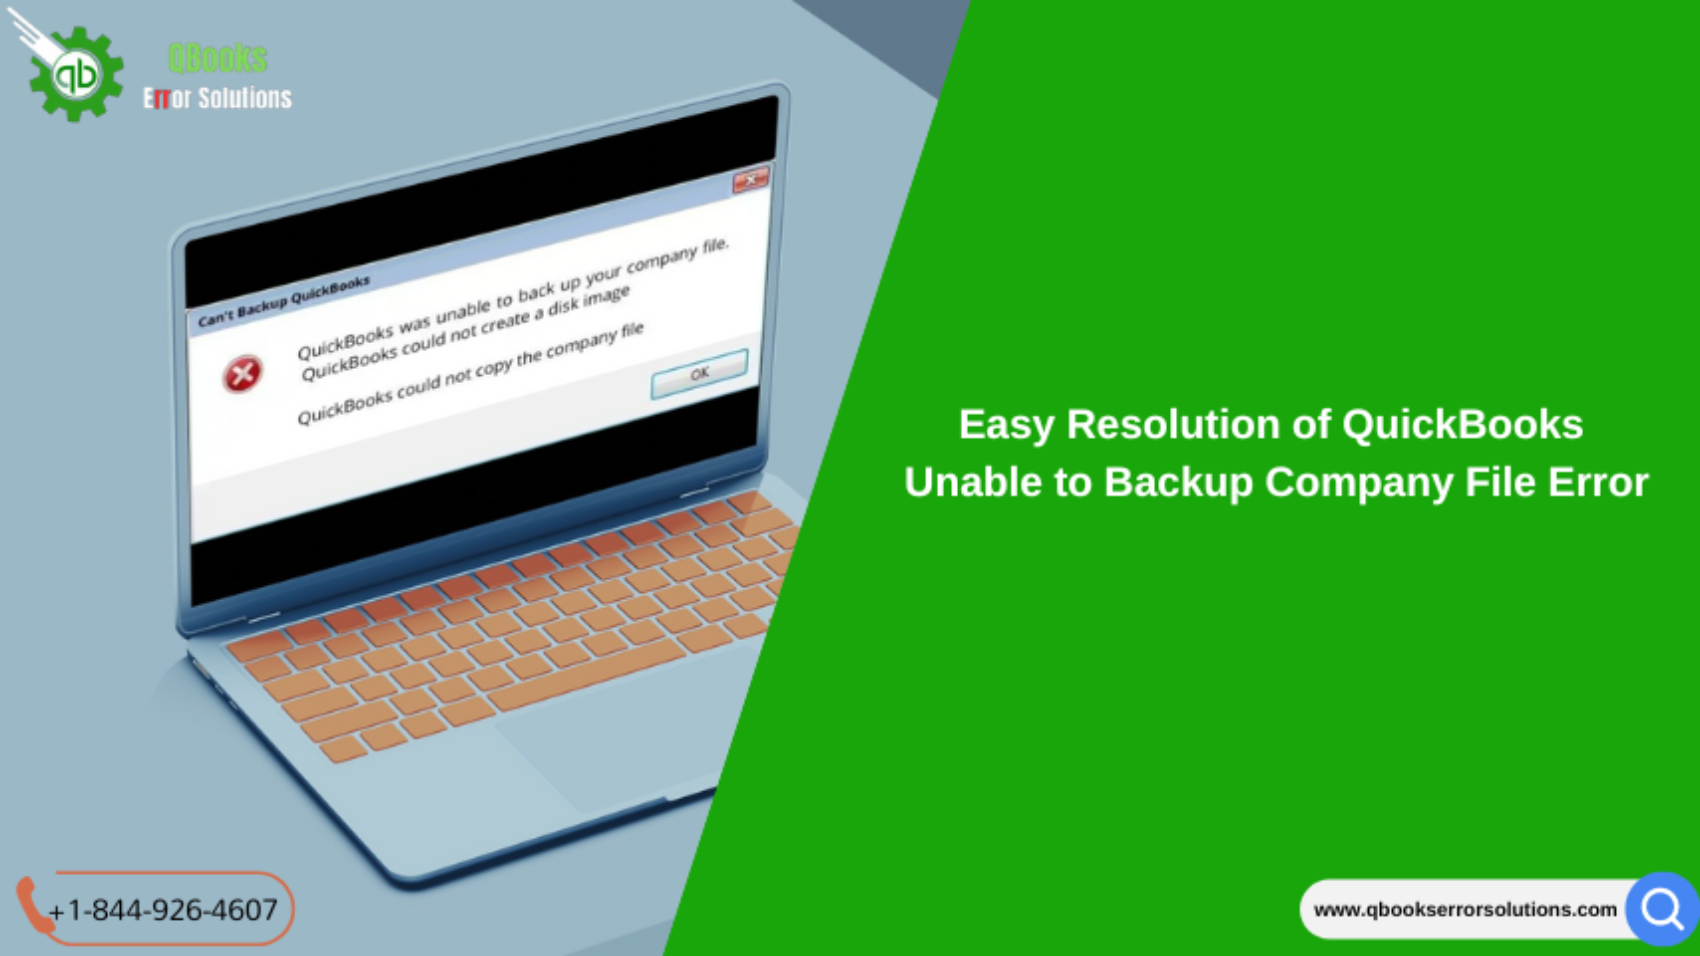 Easy Resolution of QuickBooks Unable to Backup Company File Error